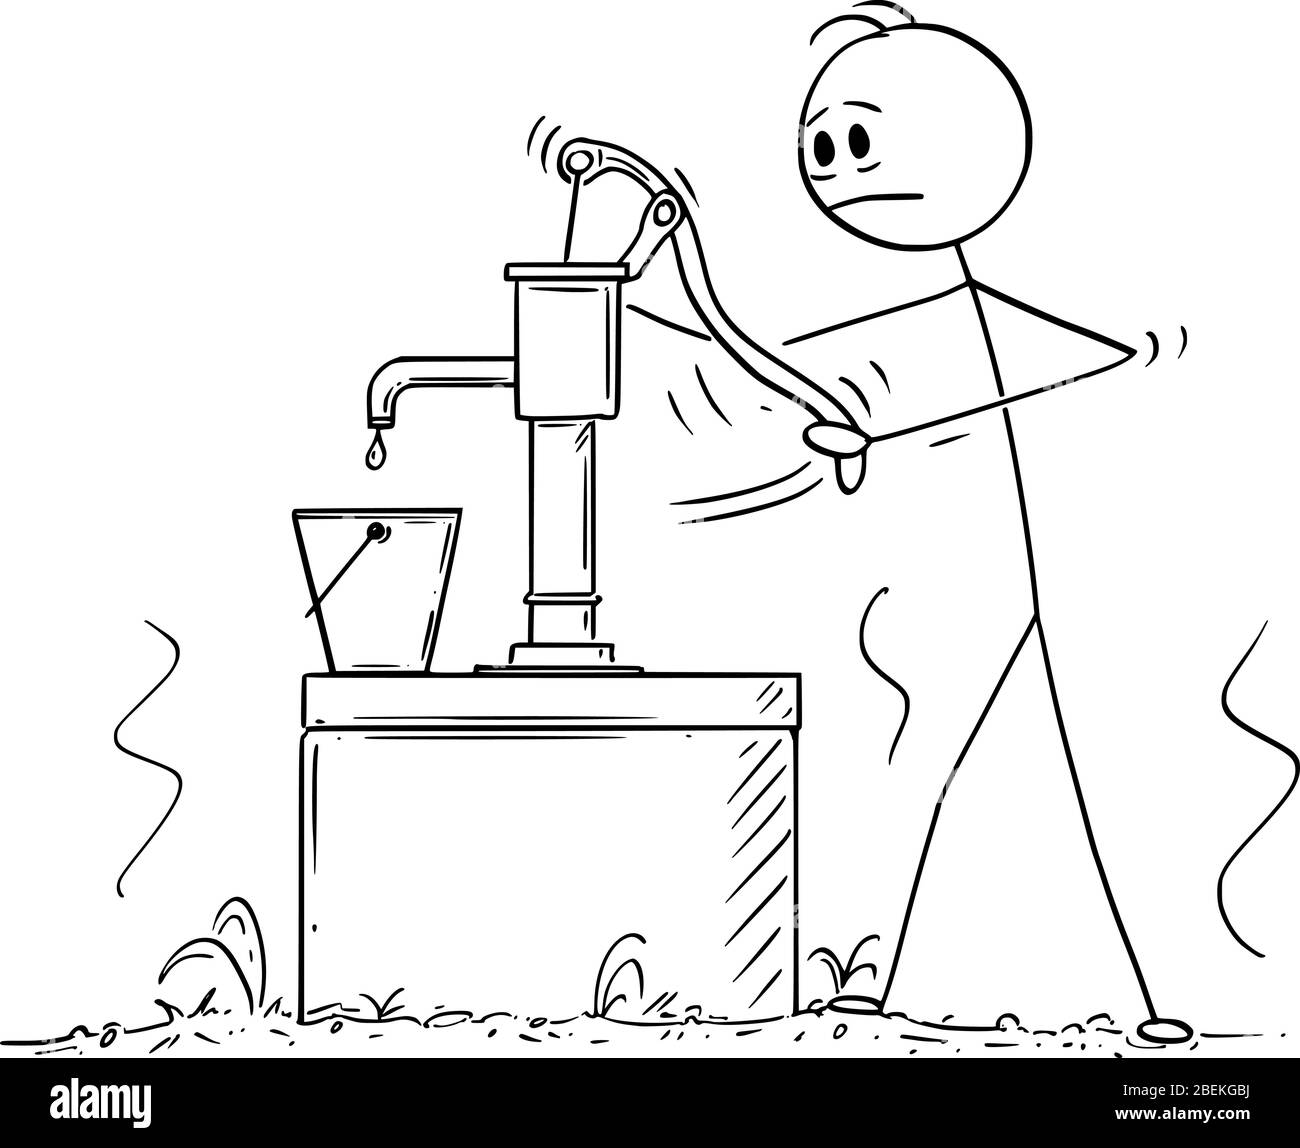 Vector cartoon stick figure drawing conceptual illustration of depressed man or farmer trying to pump or draw water From Empty Dry Well Stock Vector